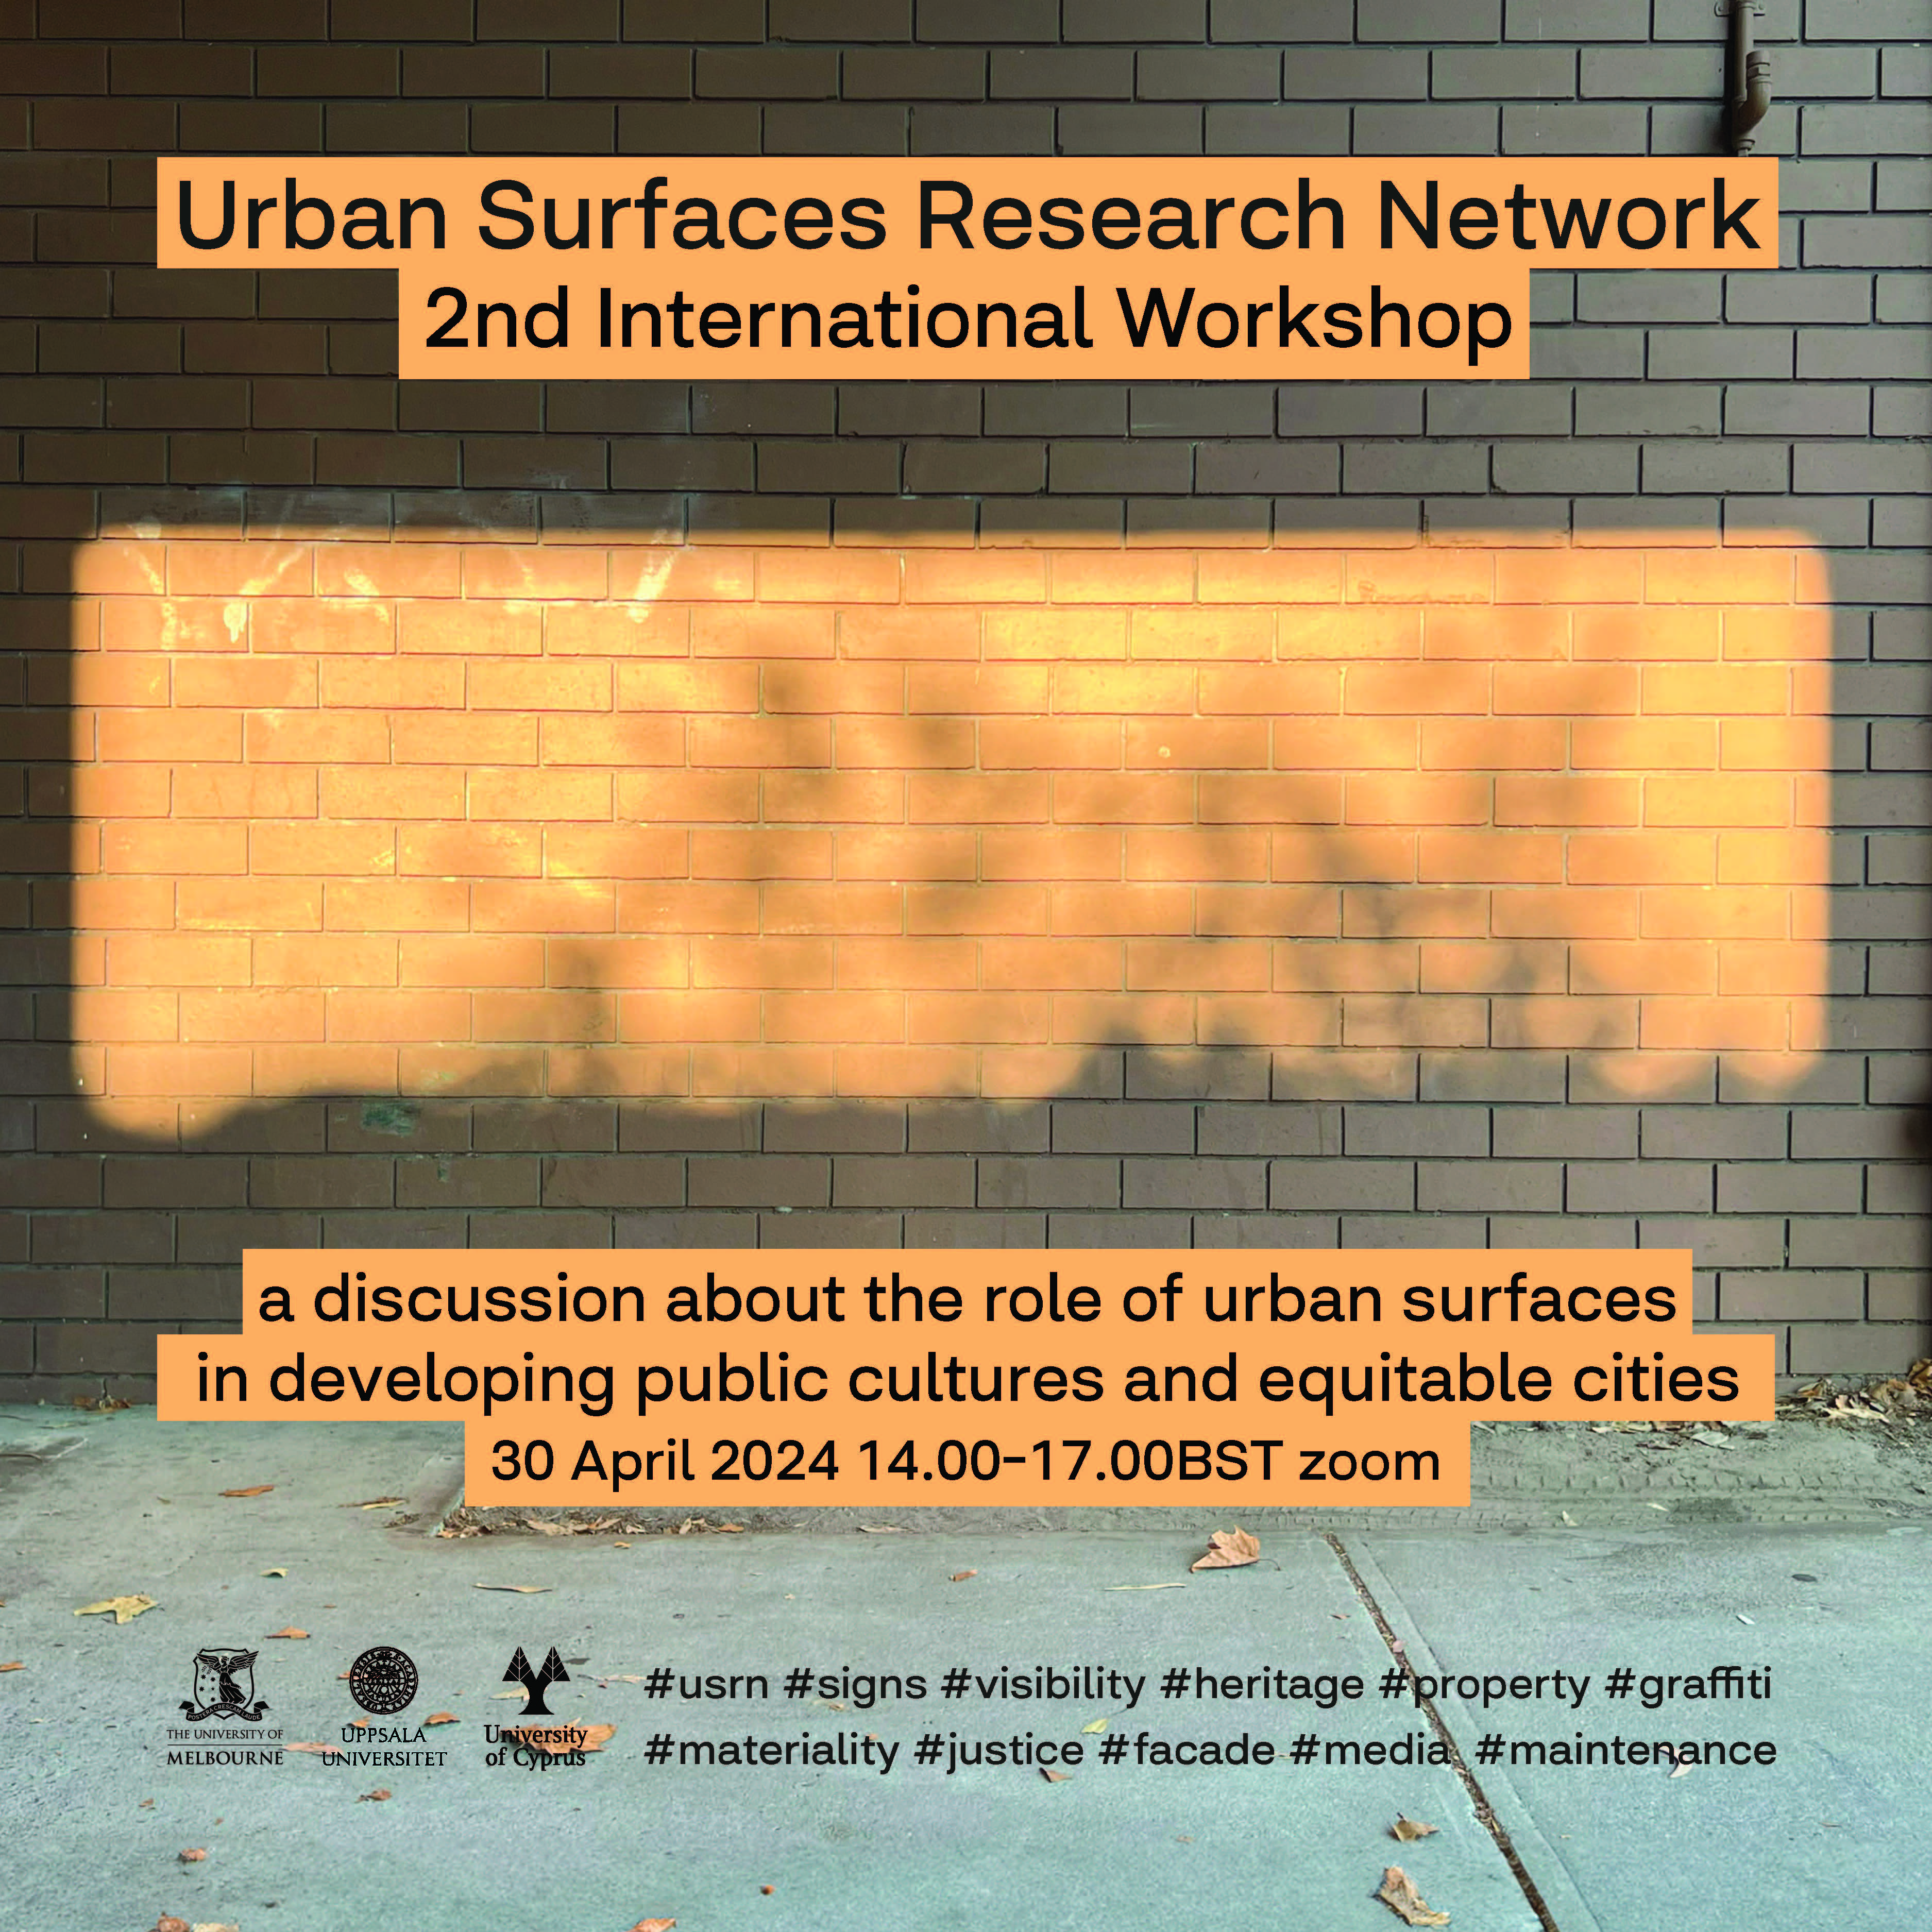 Poster for Urban Surfaces Research Network 2nd International Workshop